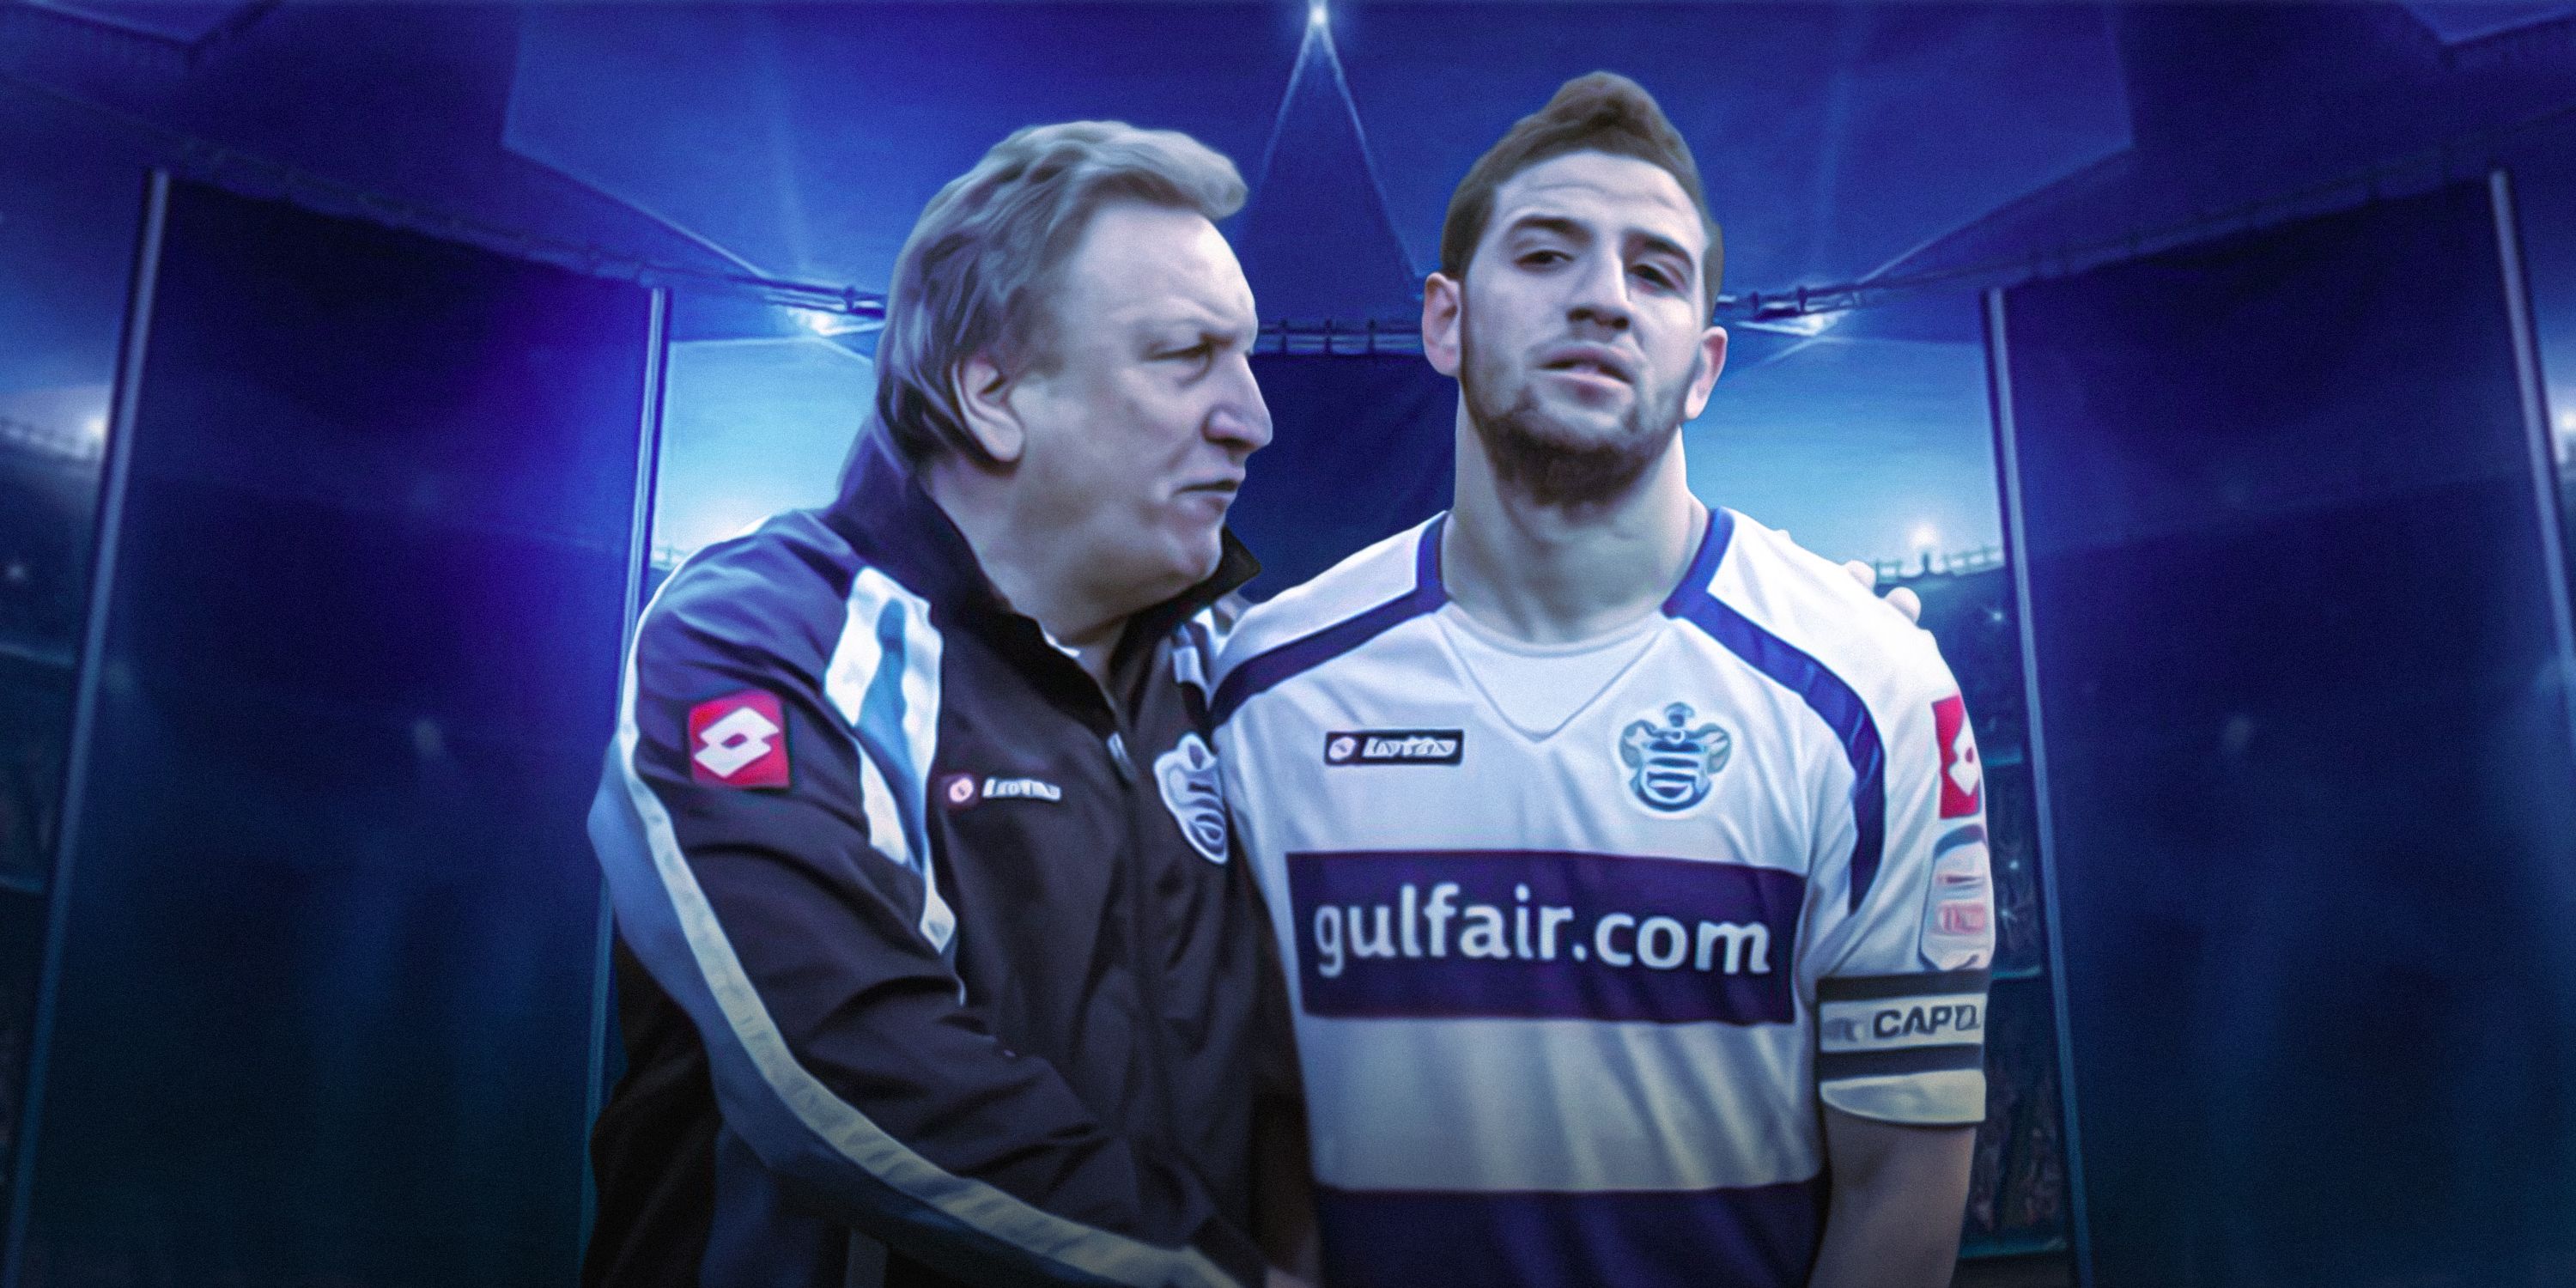 Neil Warnock explains why he fined QPR players for passing ball to Adel Taarabt